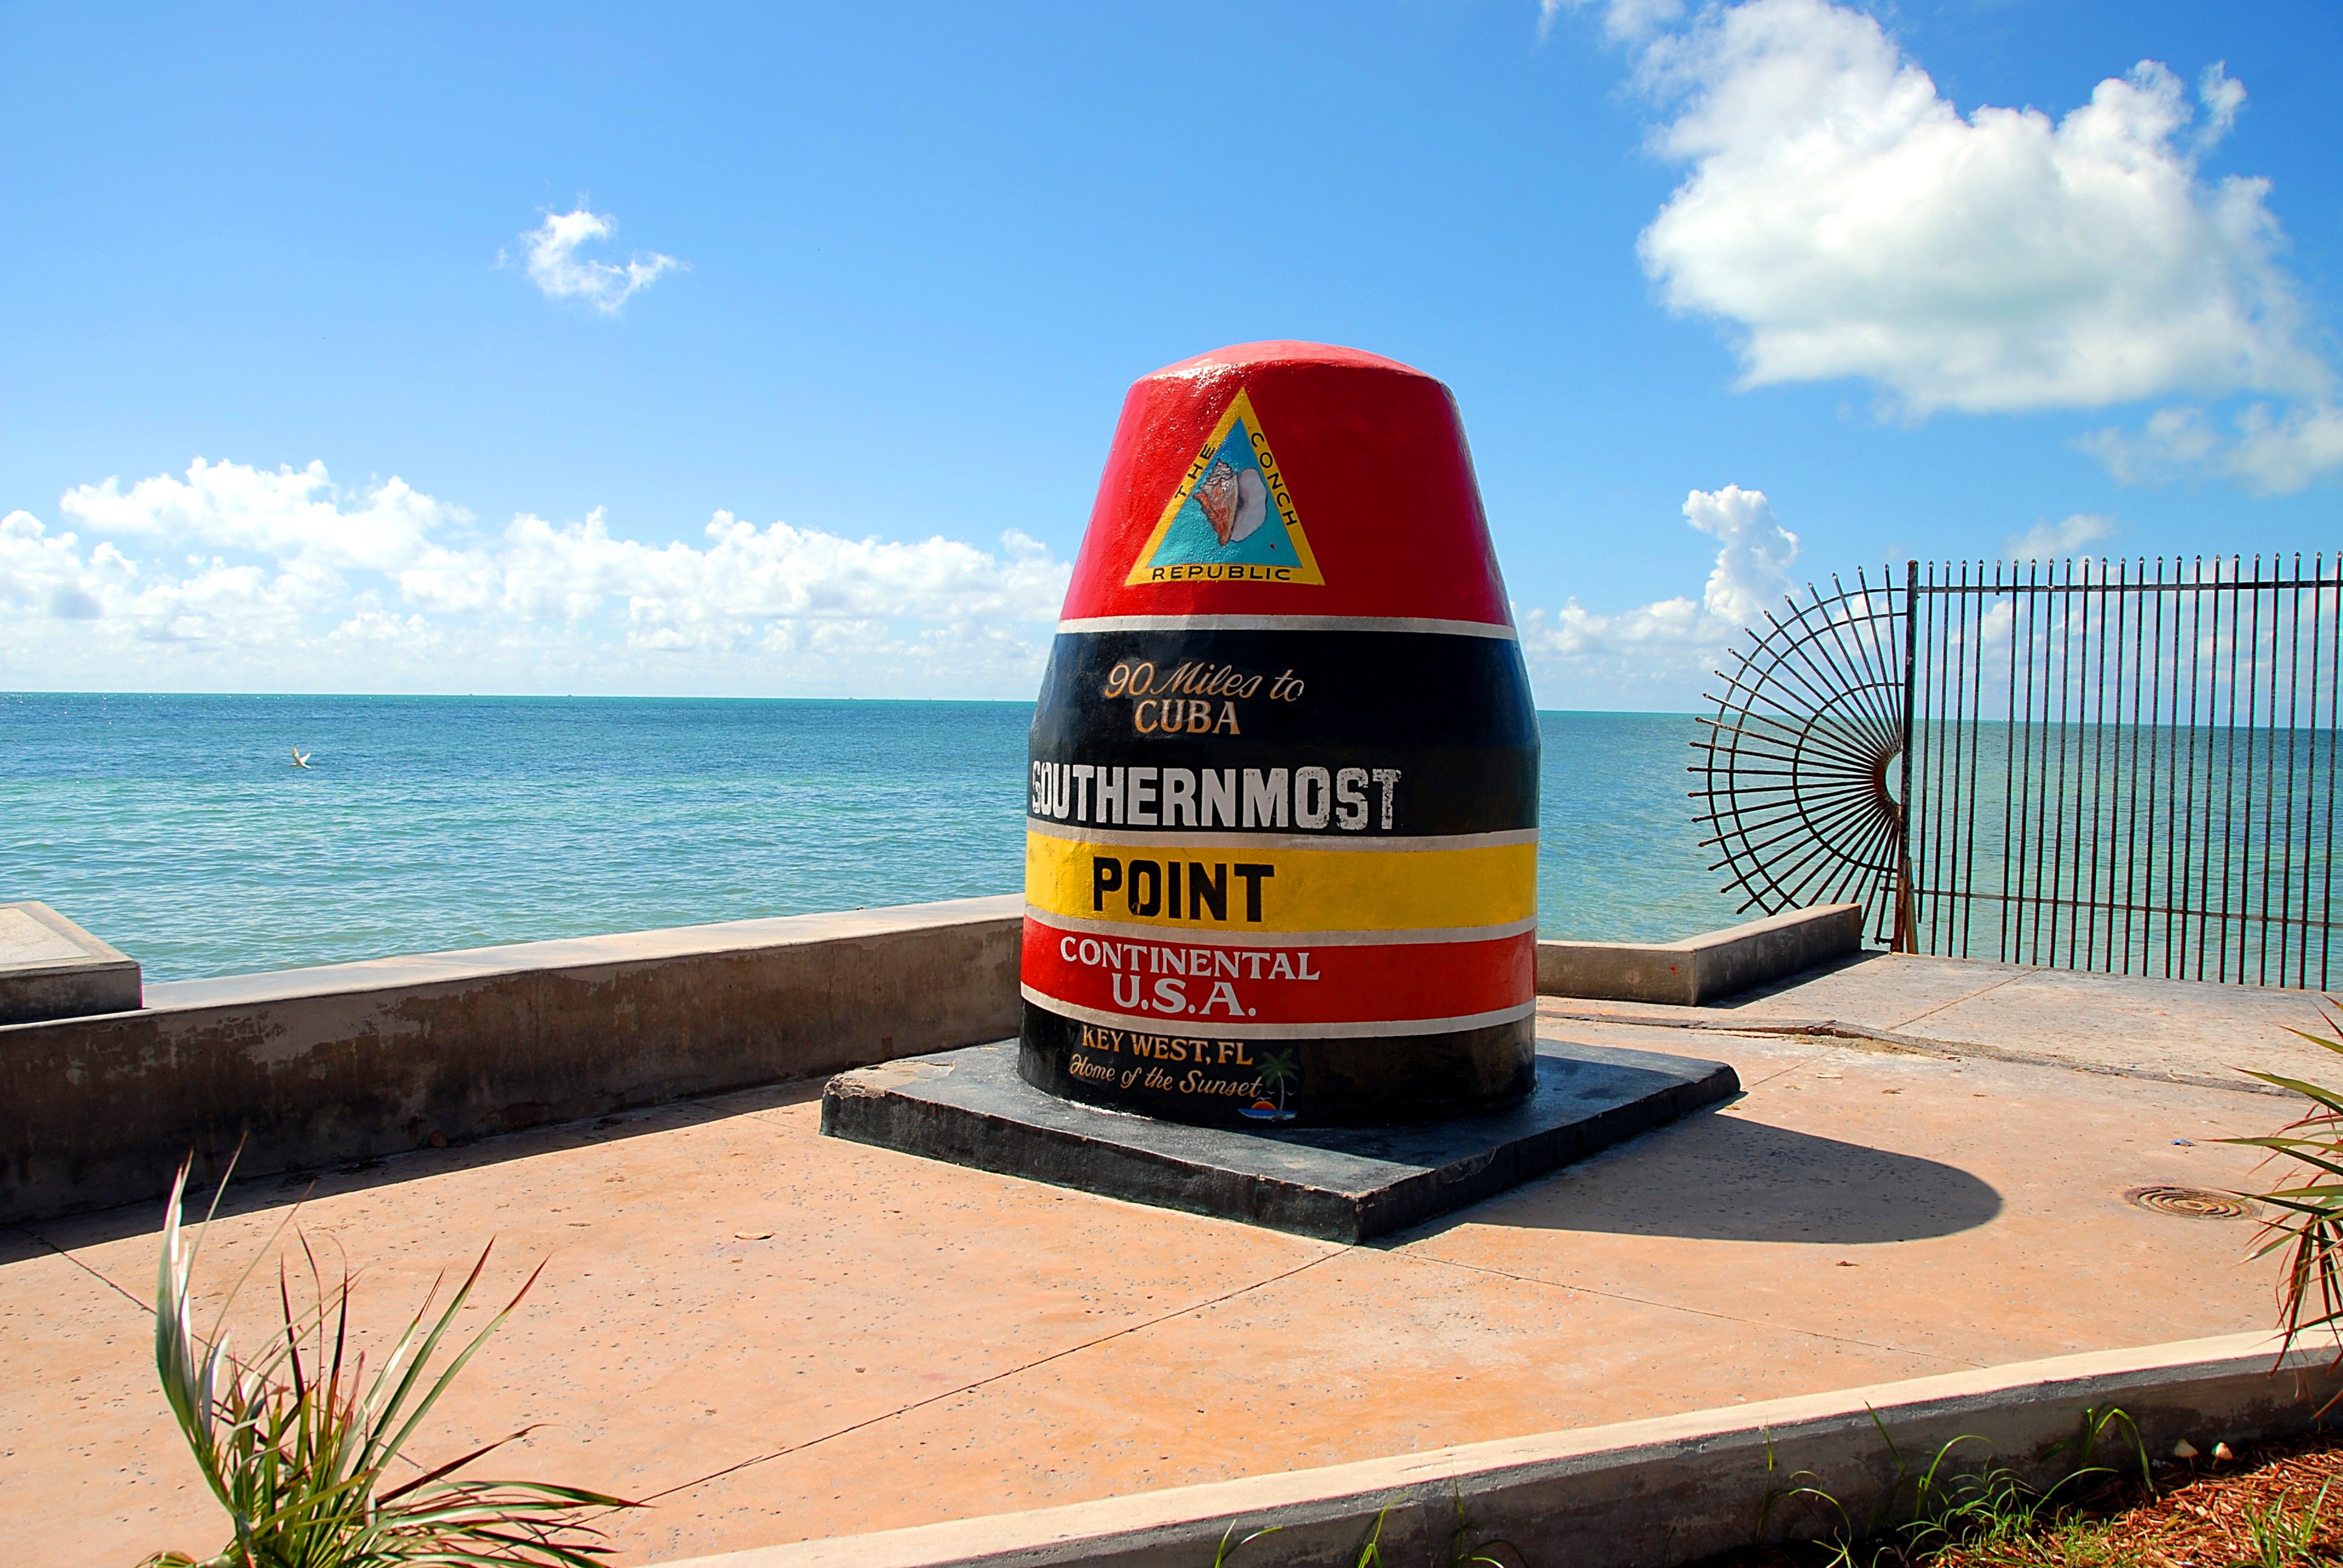 red and black southernmost point continental u.s.a. decor